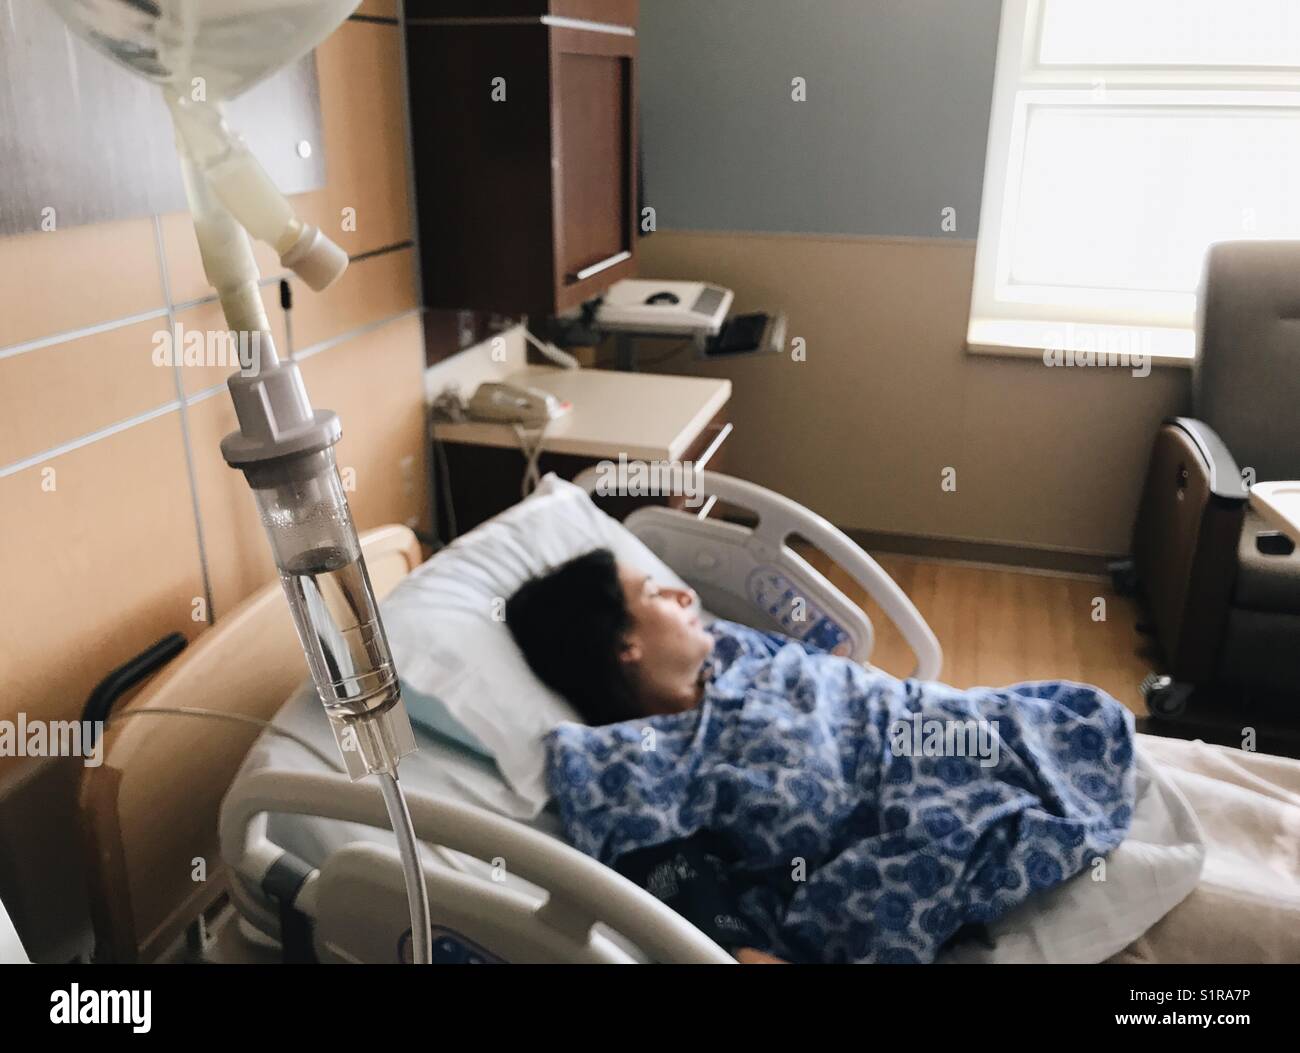 A pregnant woman on a hospital bed connected to an intravenous drip. Stock Photo